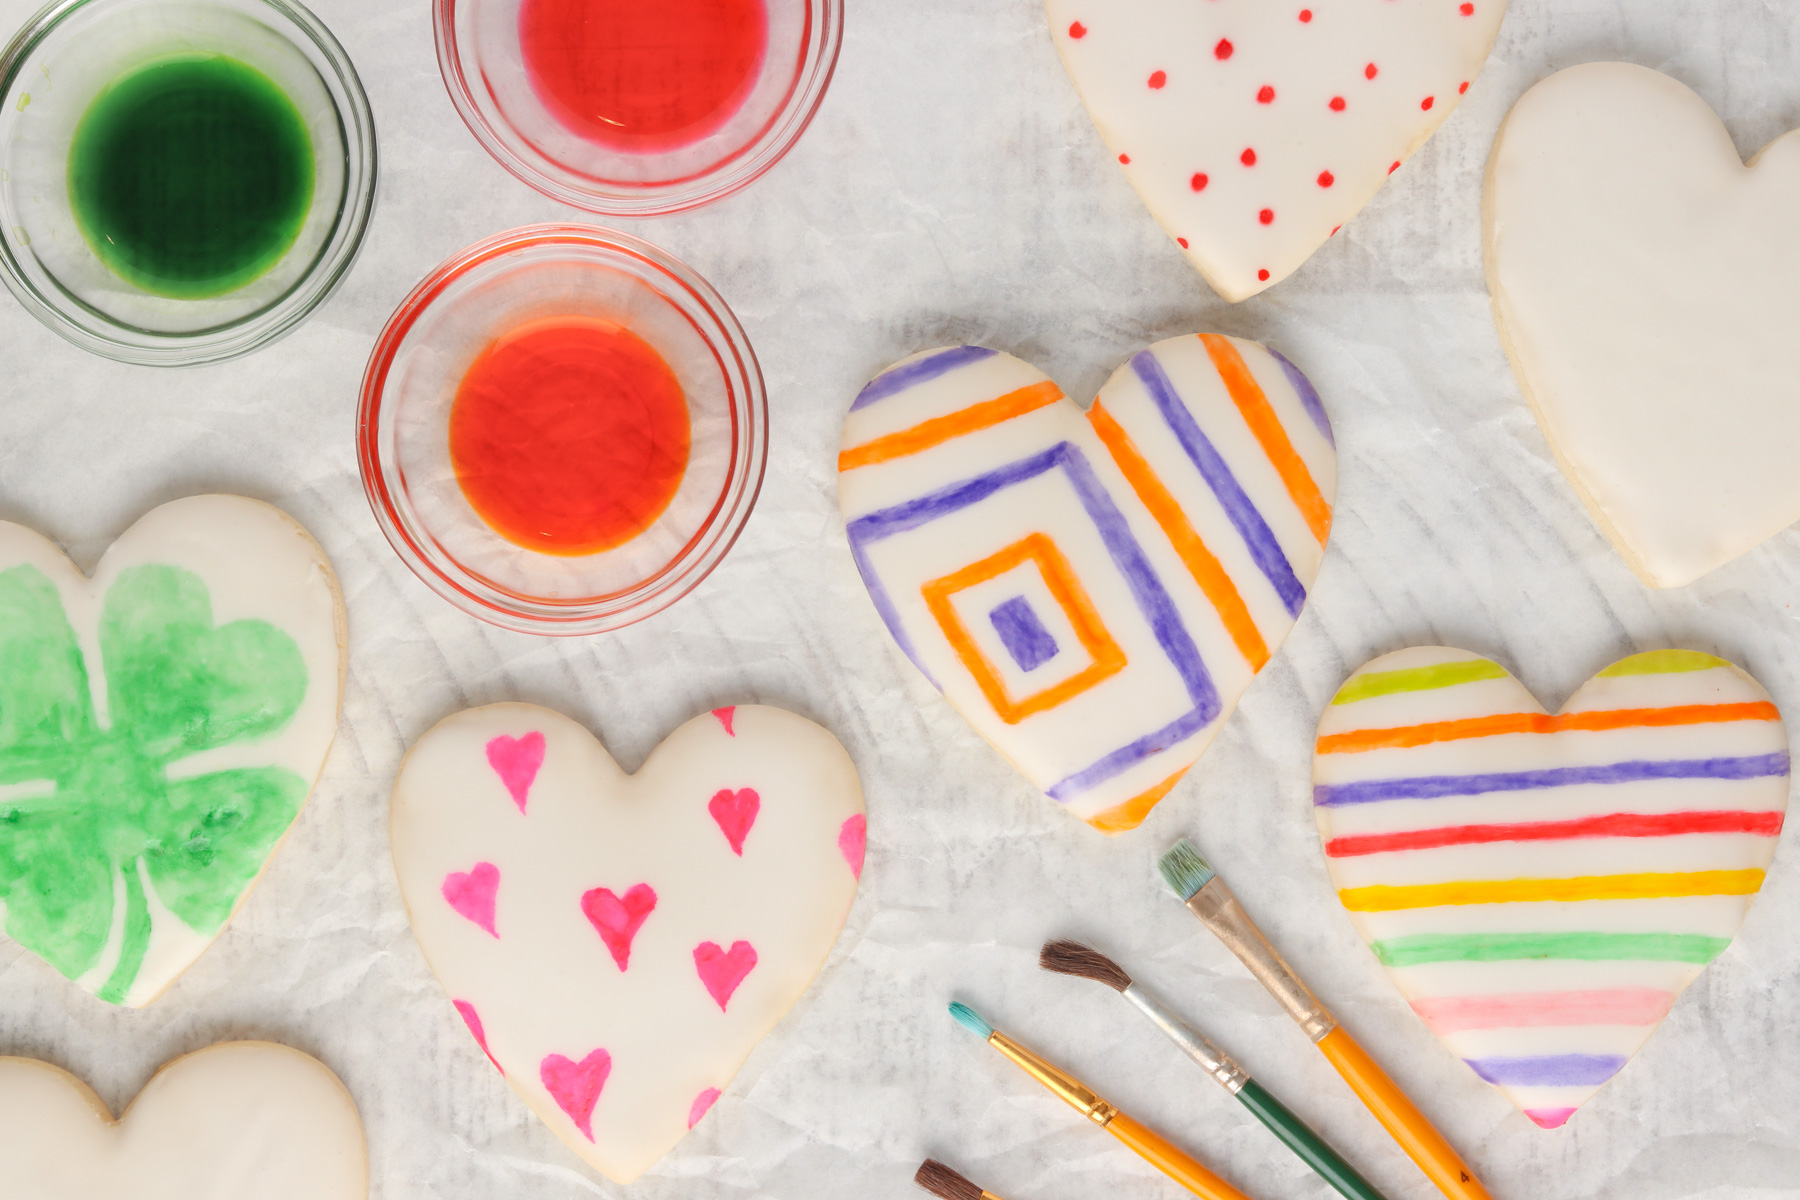 Paint your own cookies samples and green, pink and orange paint created with food gel.